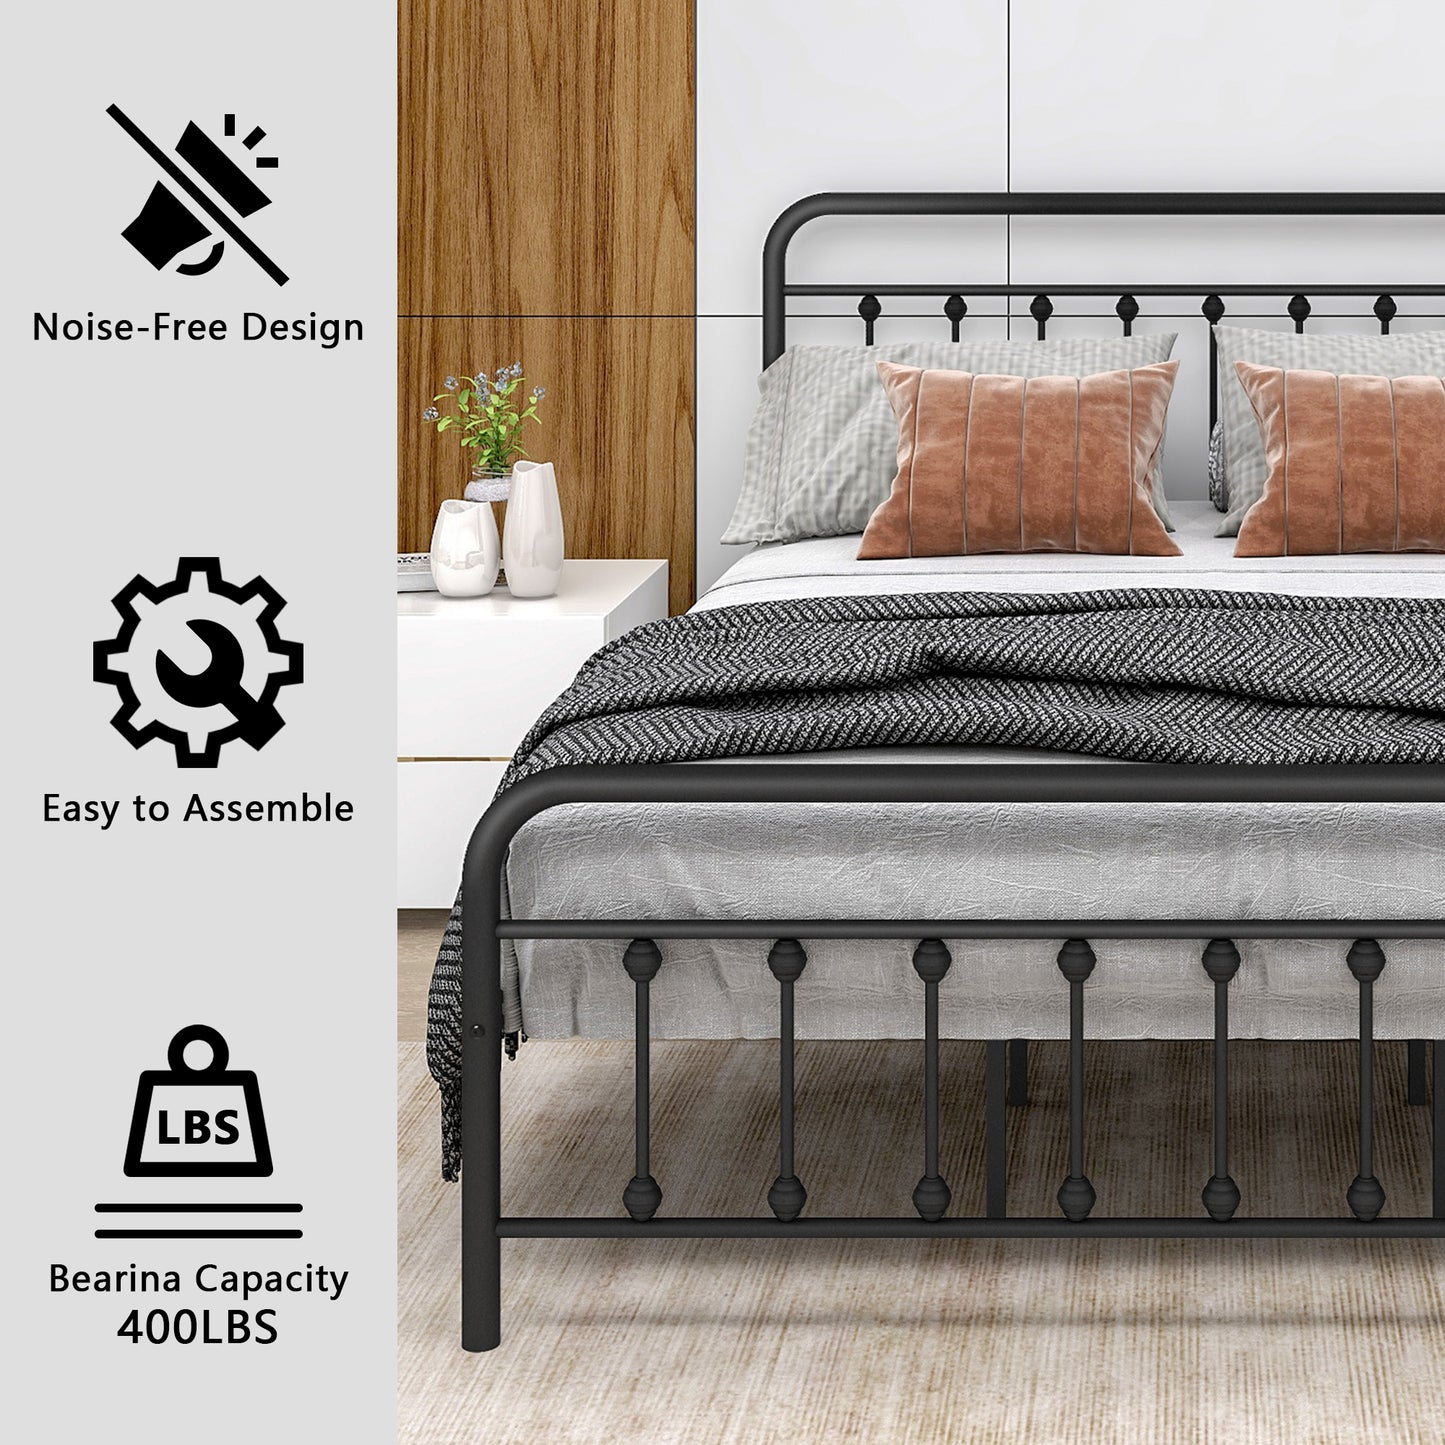 SYNGAR Iron Platform Bed Frame Queen Size with Vintage Headboard and Footboard, Metal Queen Bed Frame Mattress Foundation with Strong Steel Slat Support, Black